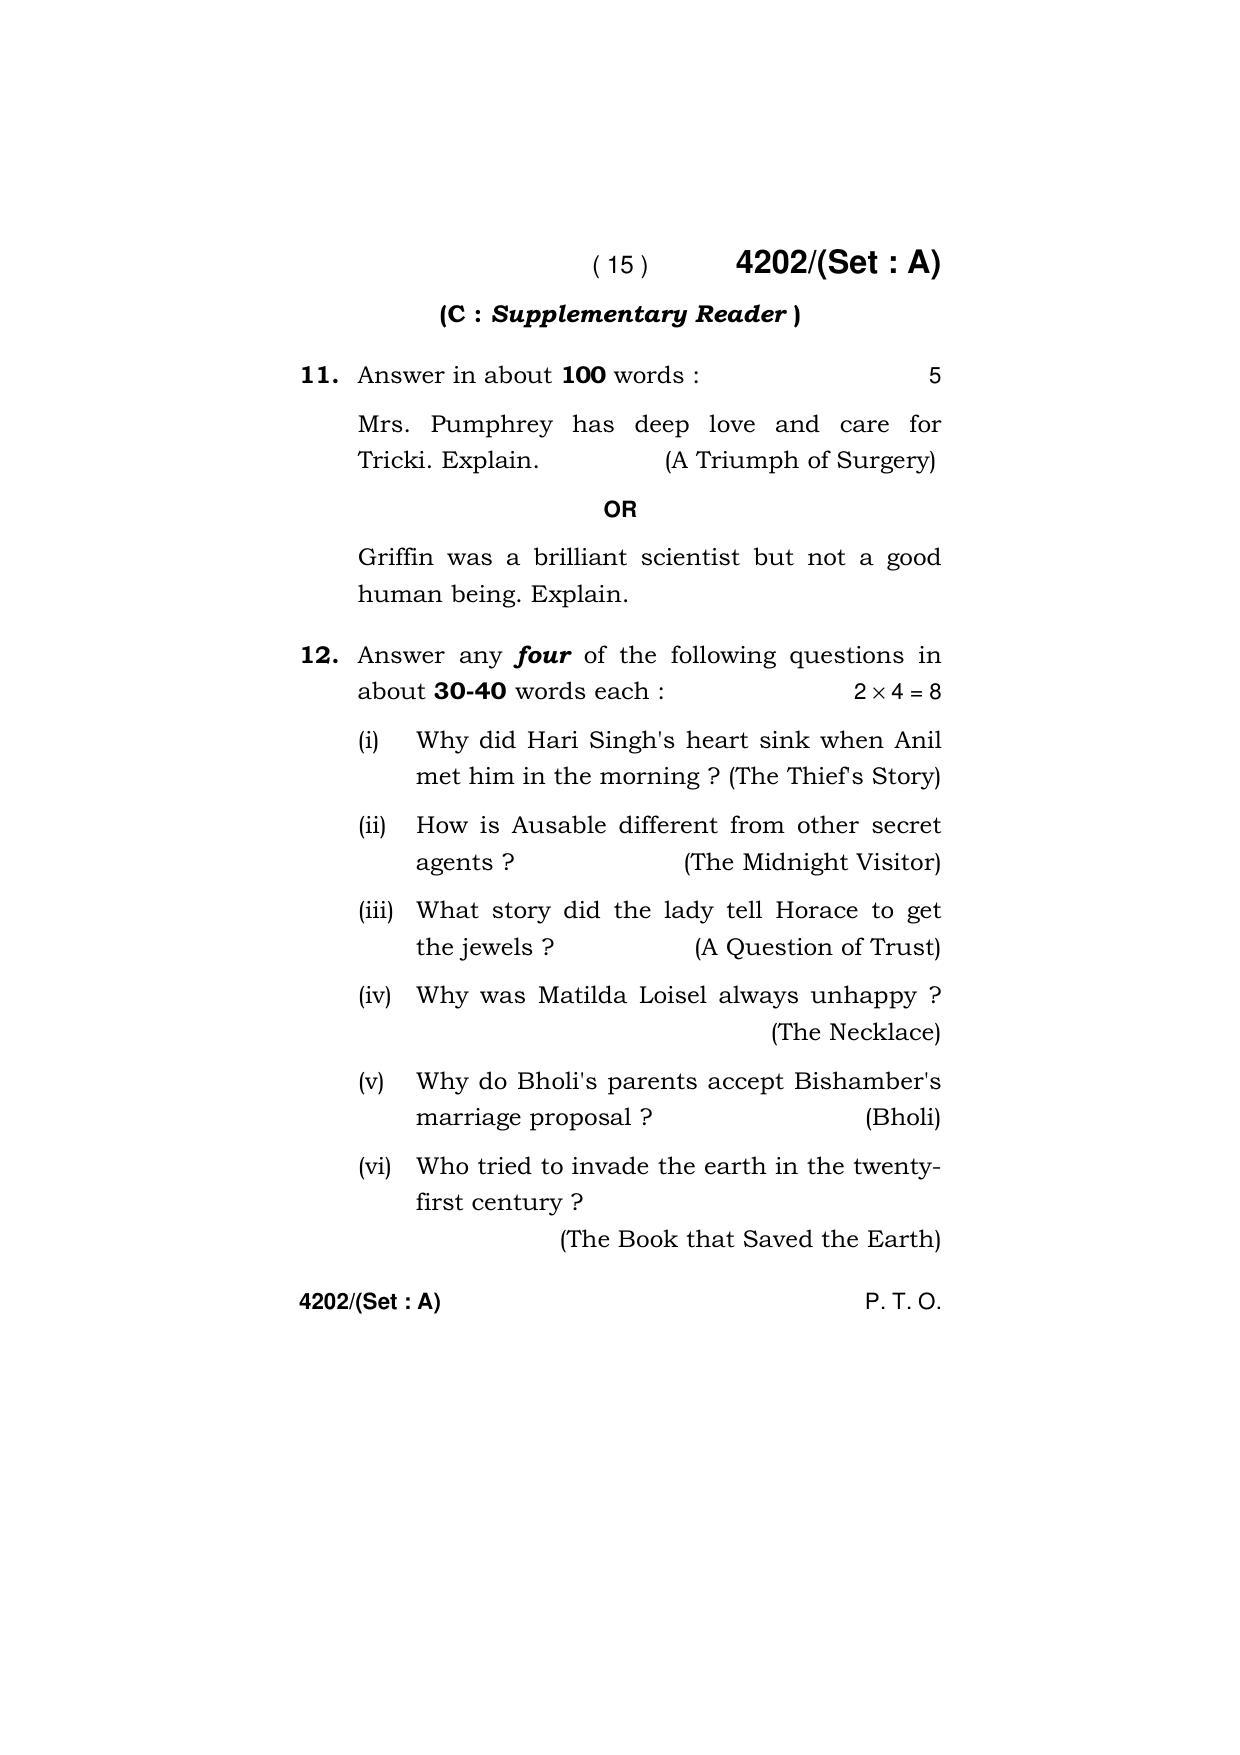 Haryana Board HBSE Class 10 English (All Set) 2019 Question Paper - Page 15